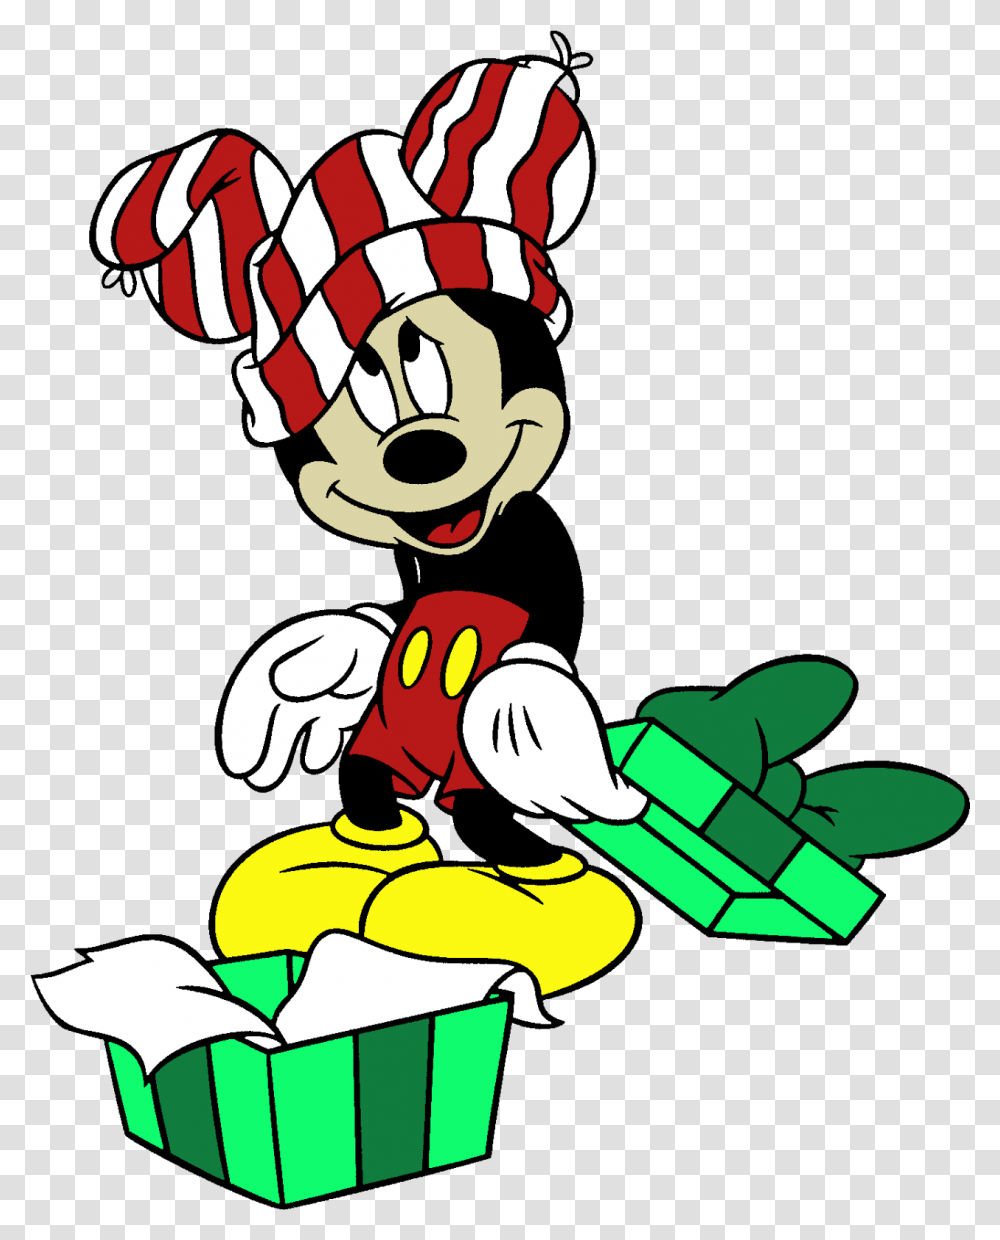 Goofy Christmas Clipart Goofy Mickey Mouse And Disney Clip Art Merry Christmas, Graphics, Hand, Crowd, Elf Transparent Png